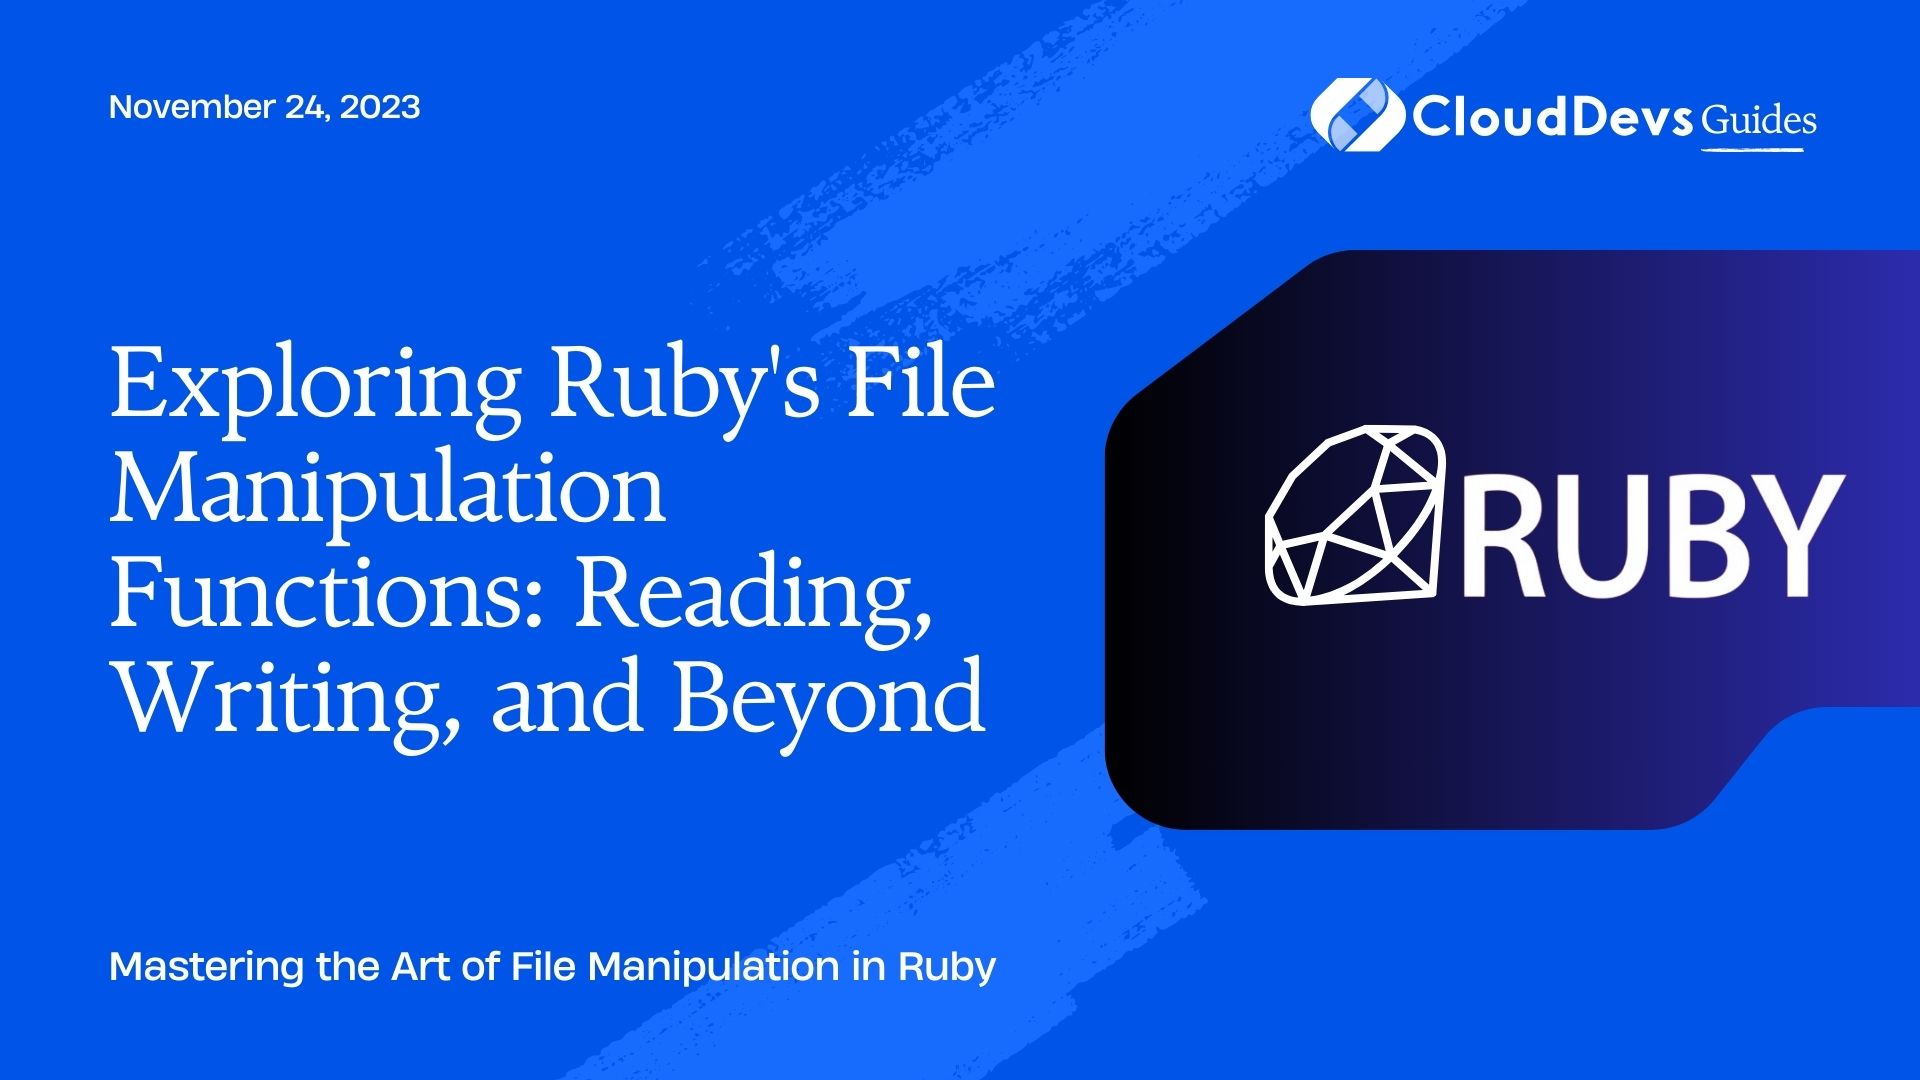 Exploring Ruby's File Manipulation Functions: Reading, Writing, and Beyond